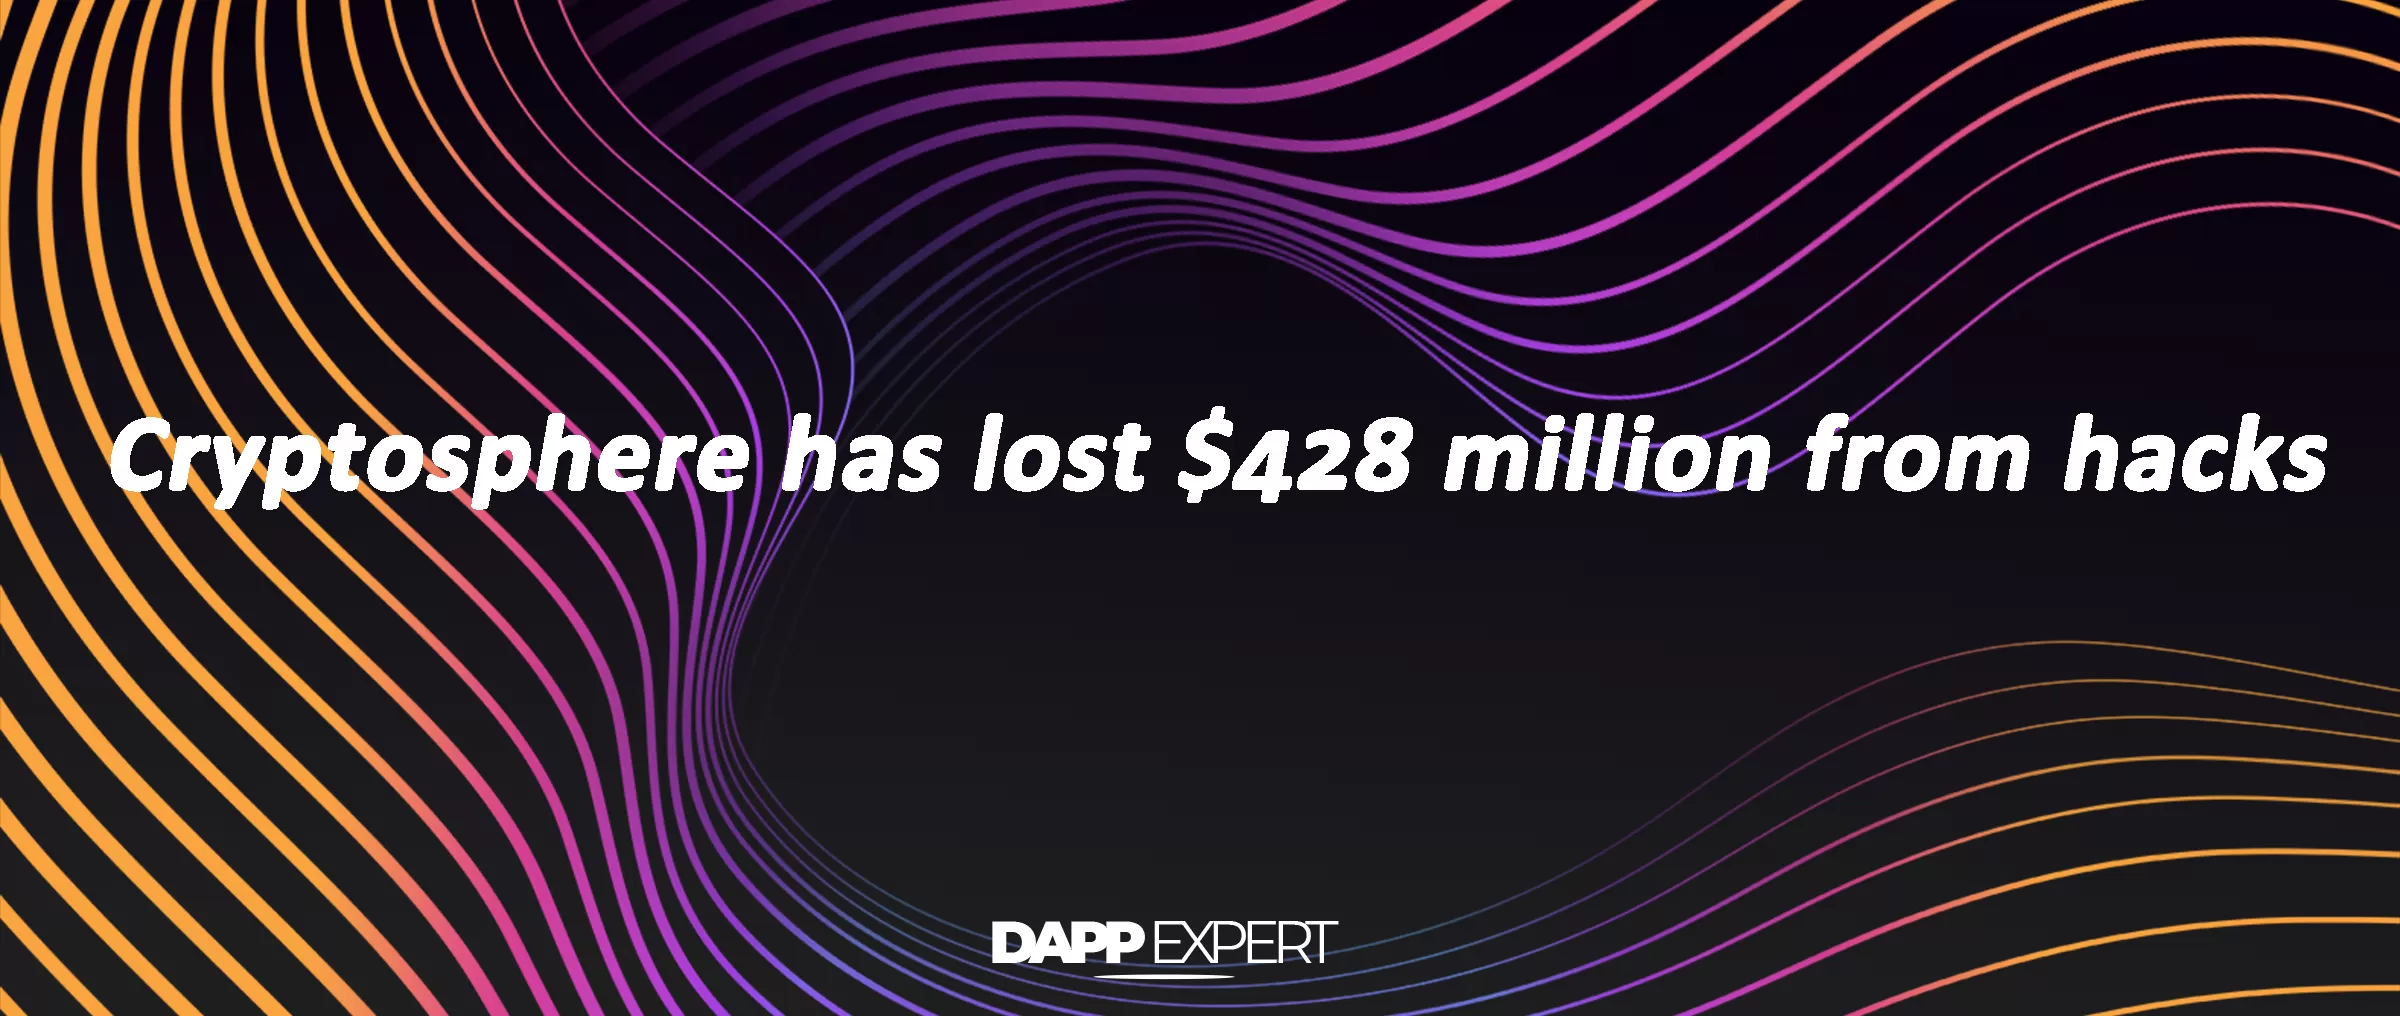 Cryptosphere has lost $428 million from hacks